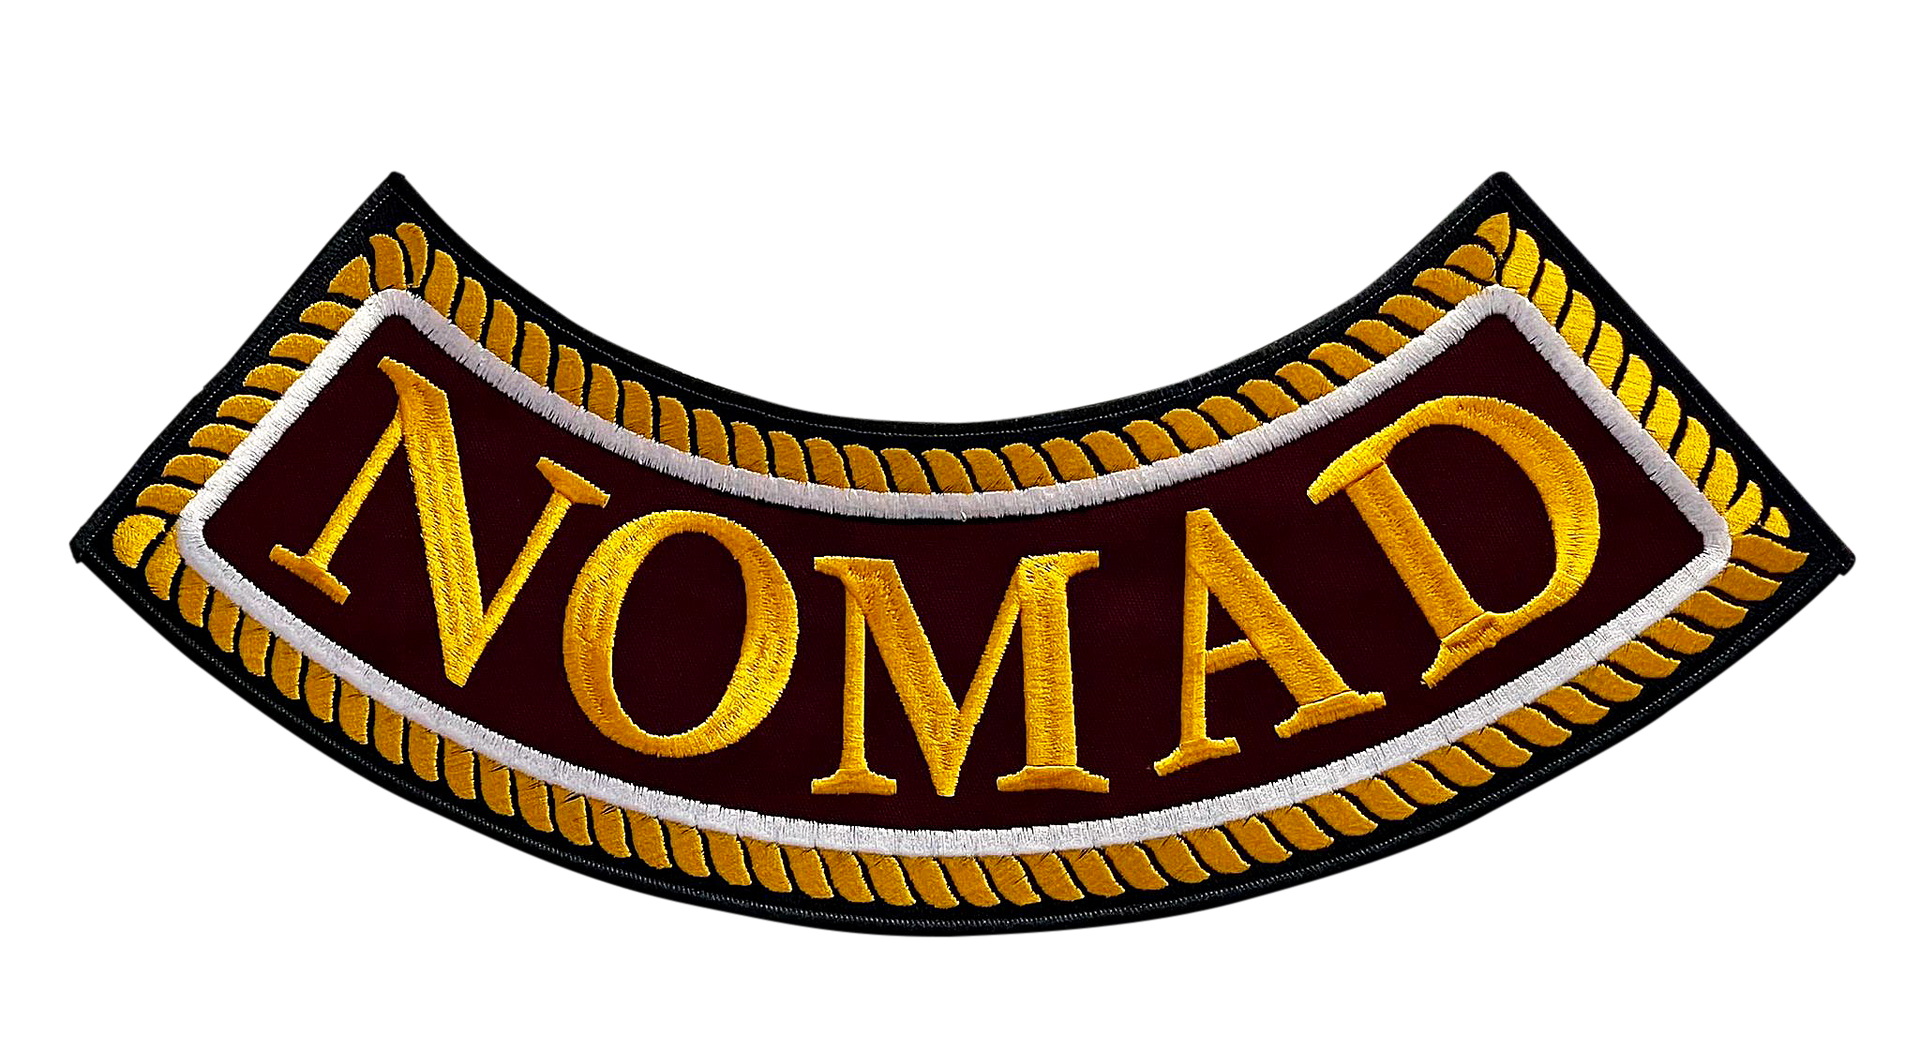 A patch with the word nomad on it